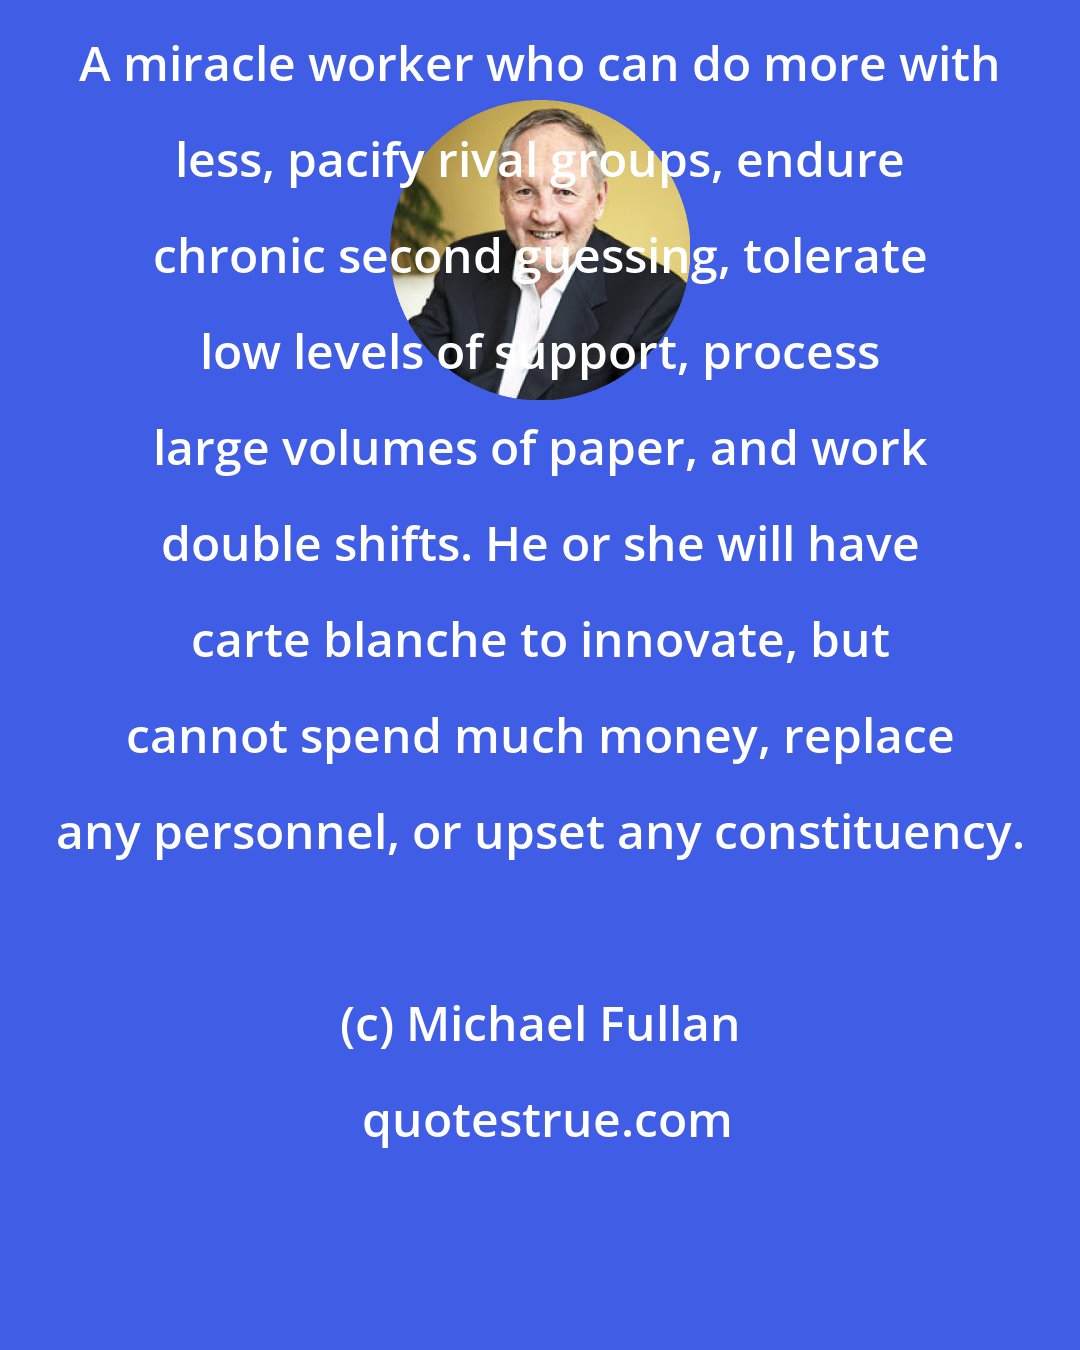 Michael Fullan: A miracle worker who can do more with less, pacify rival groups, endure chronic second guessing, tolerate low levels of support, process large volumes of paper, and work double shifts. He or she will have carte blanche to innovate, but cannot spend much money, replace any personnel, or upset any constituency.